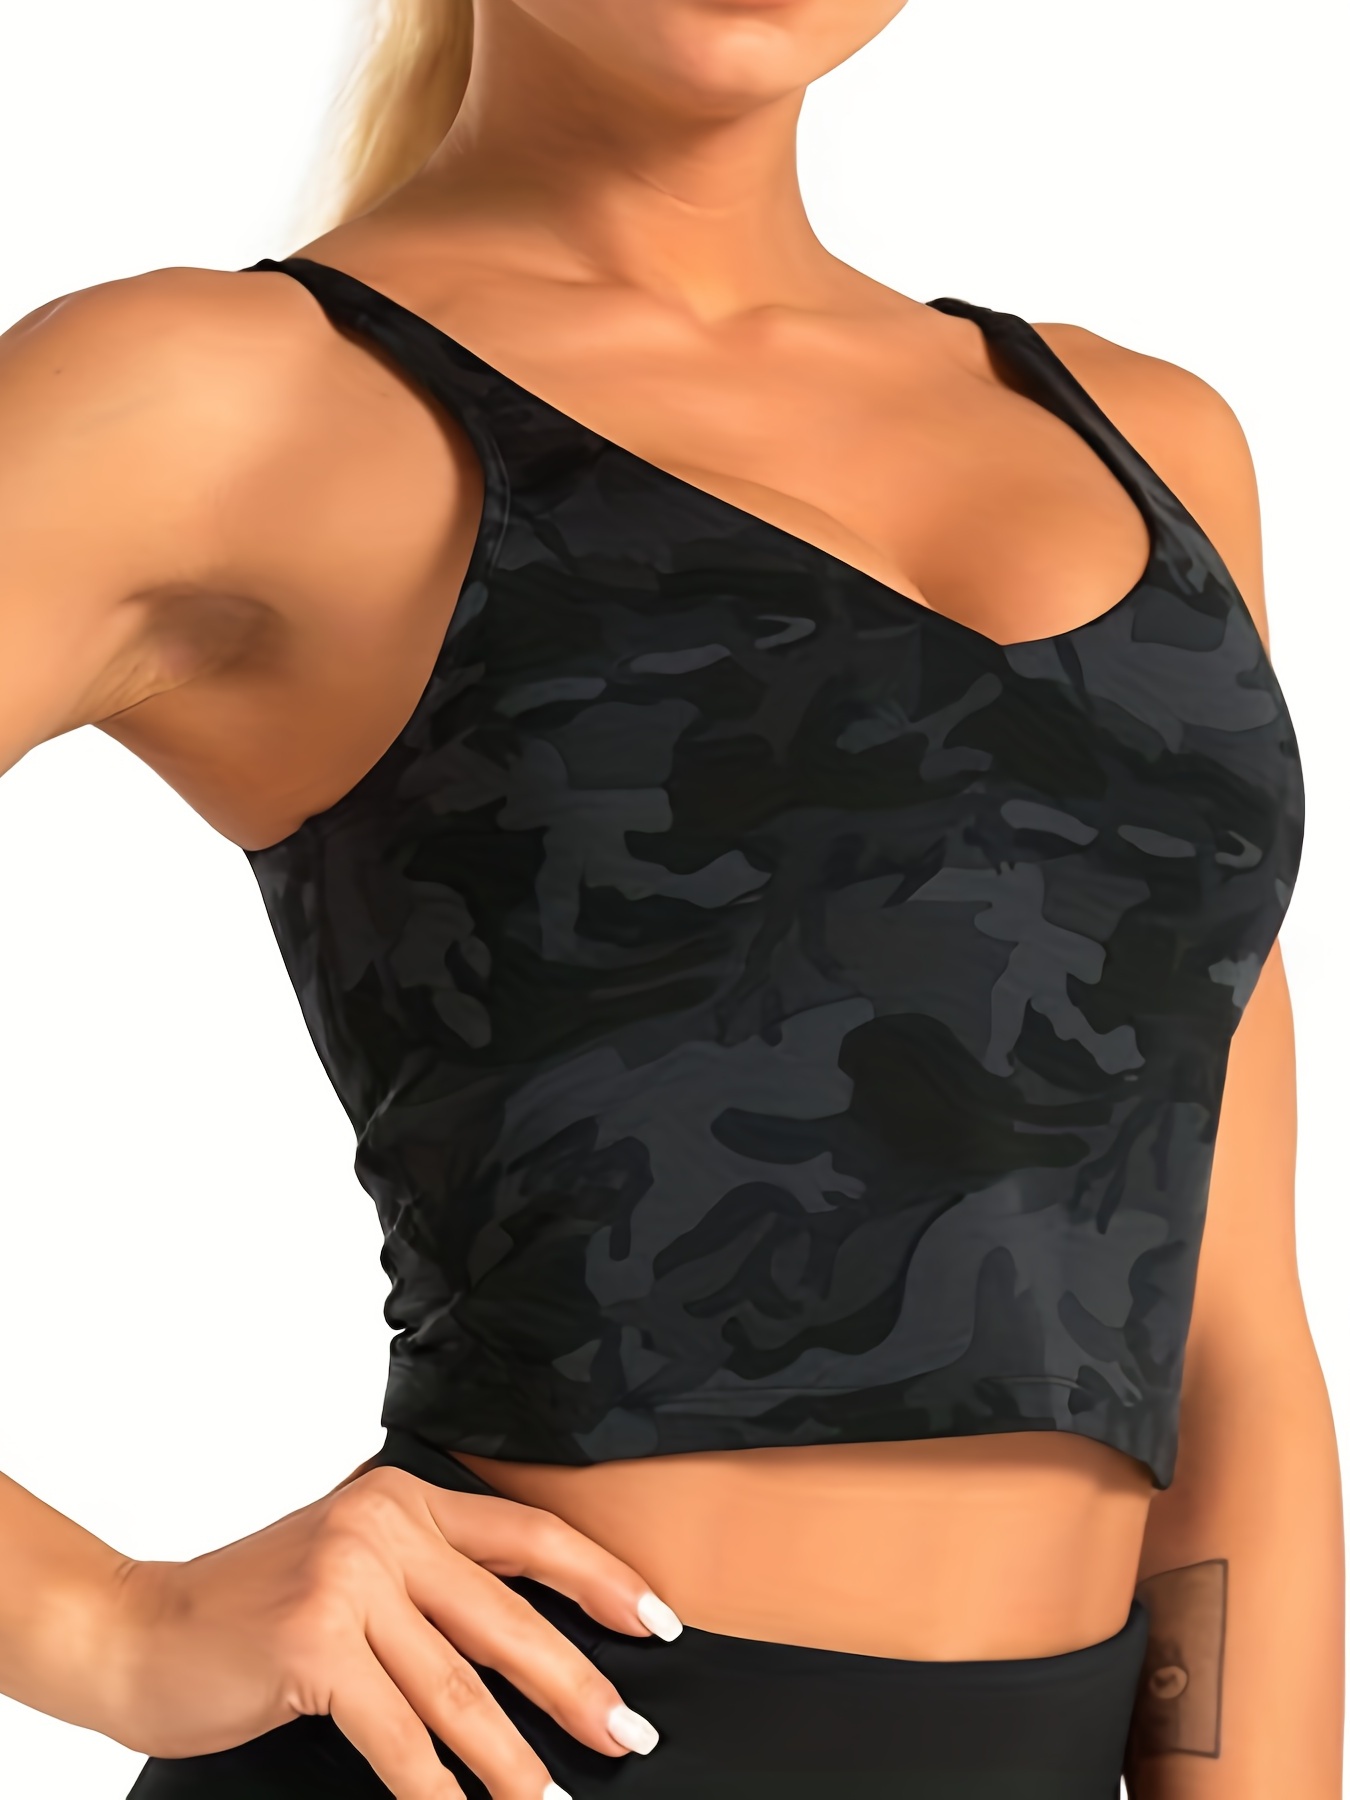 GEMCHO Womens' Sports Bra Longline Wirefree Padded With Medium Support